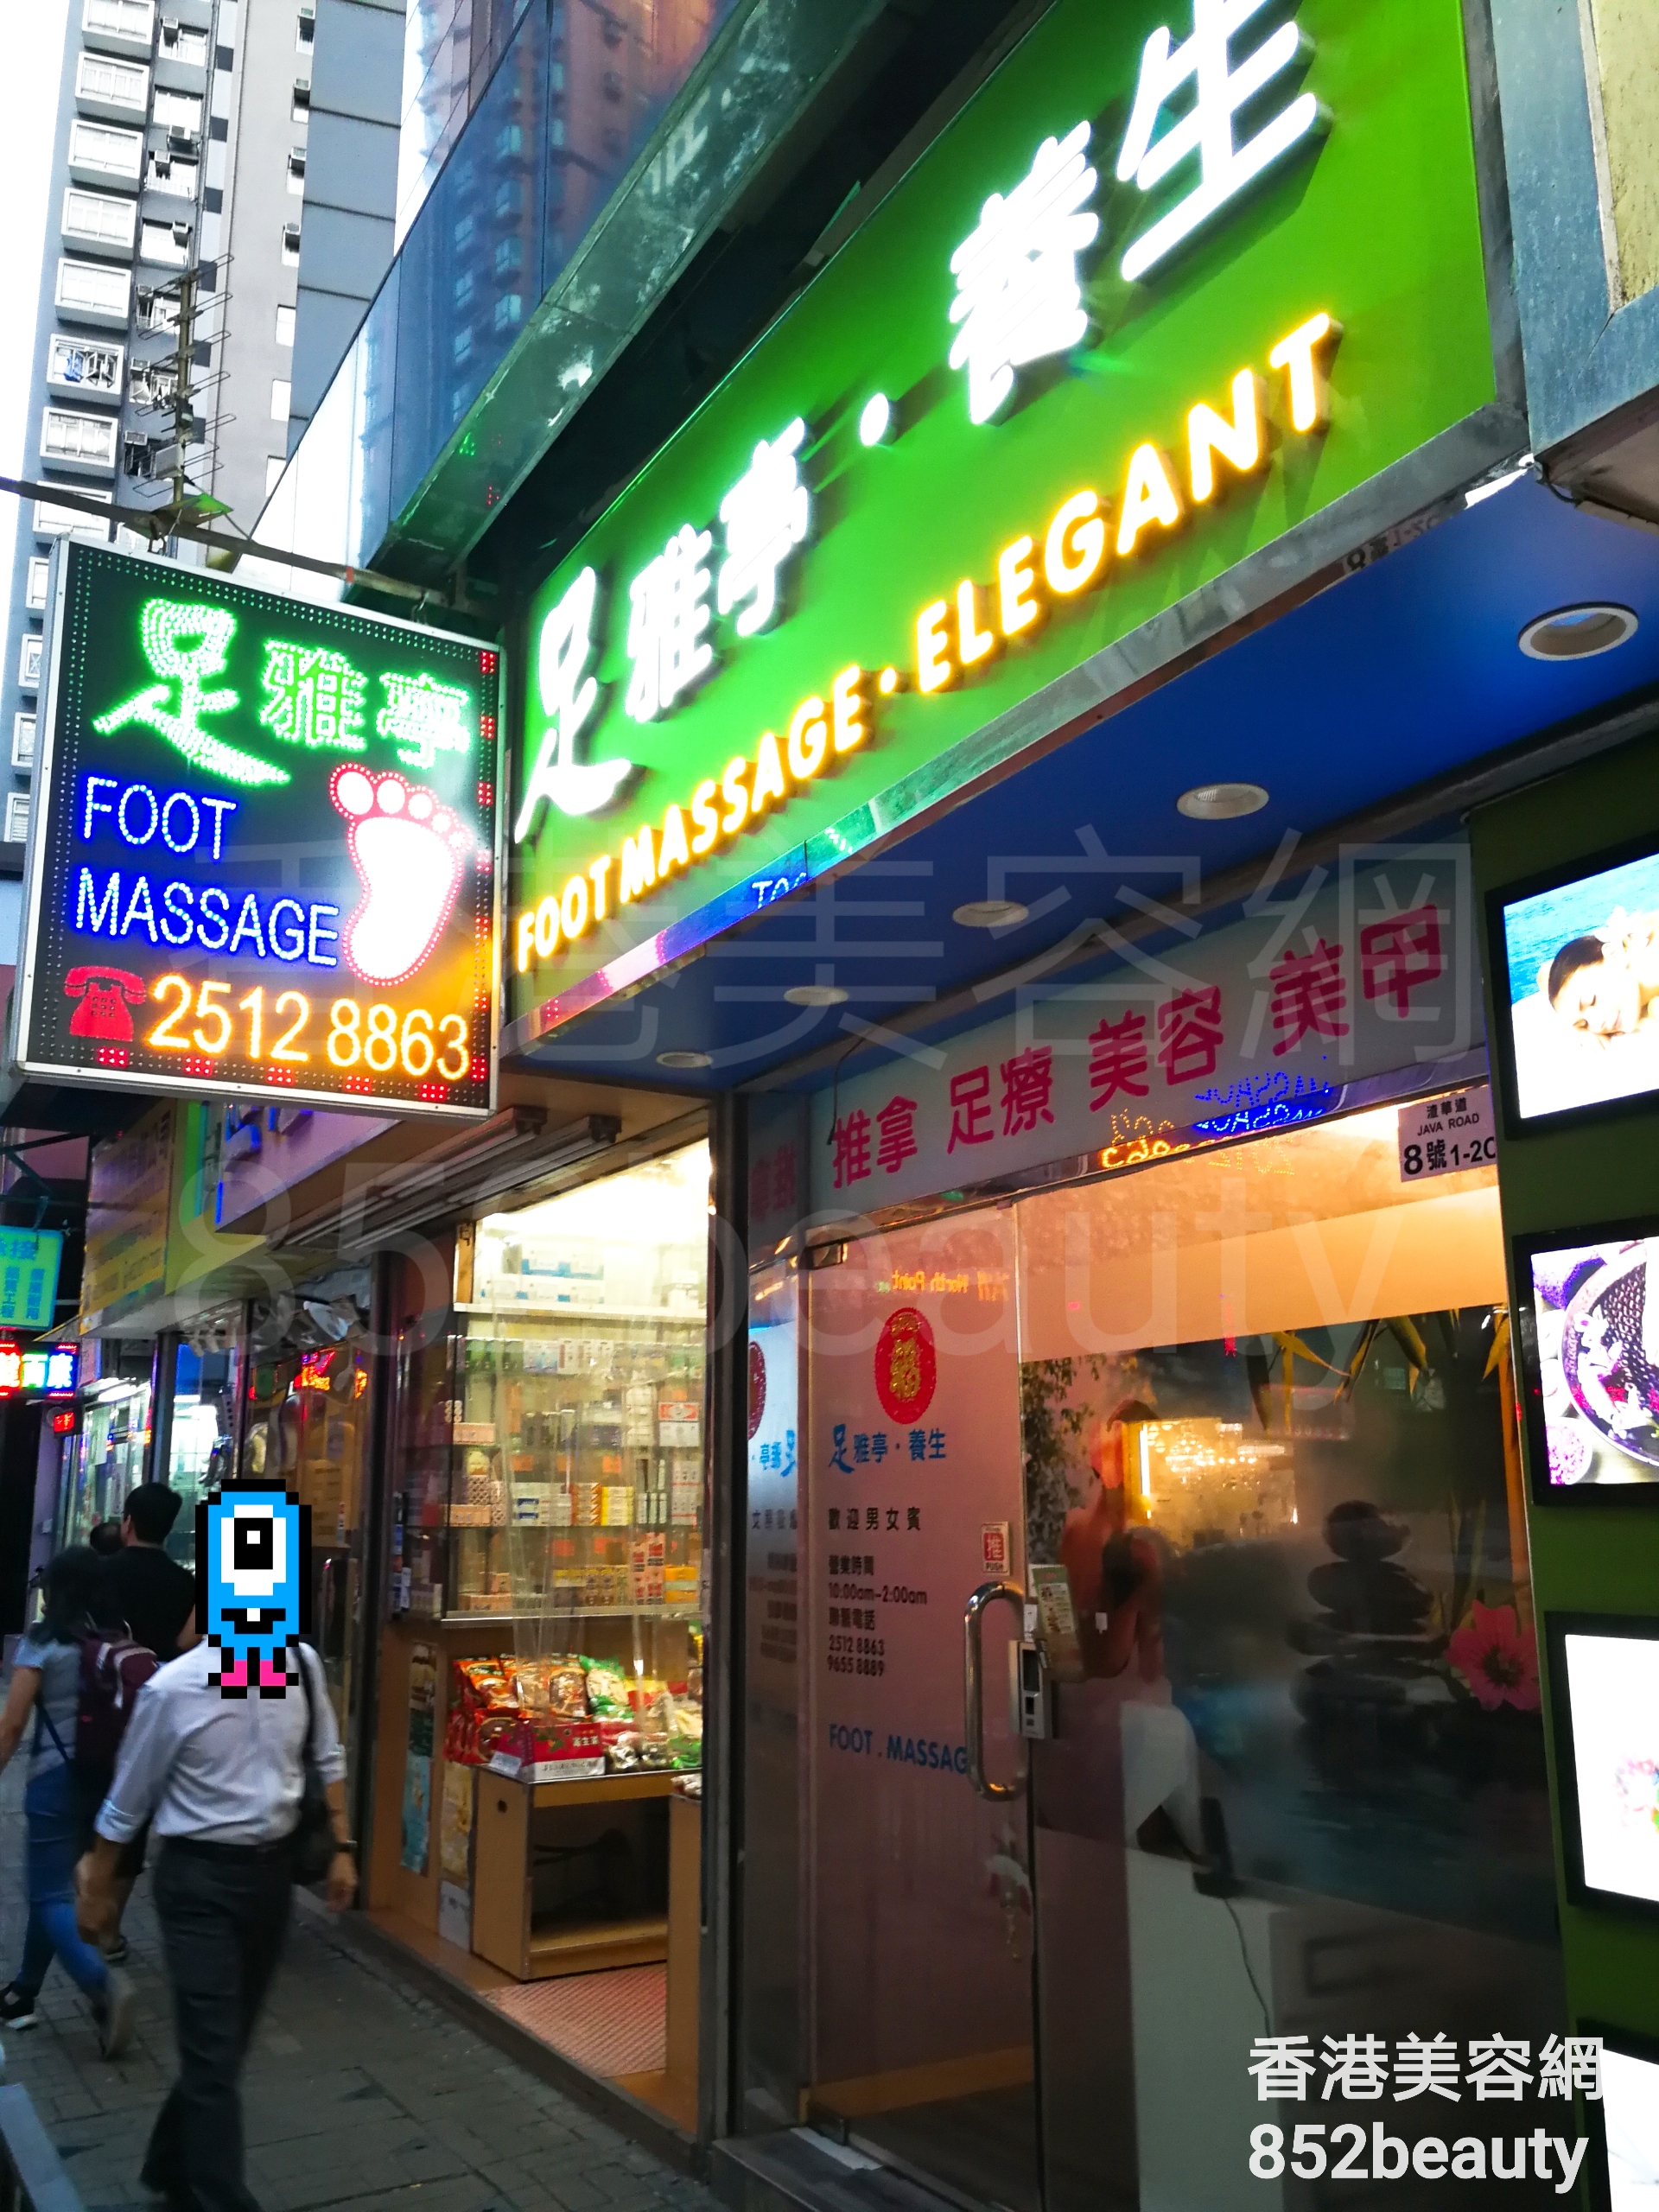 Hand and foot care: 足雅亭